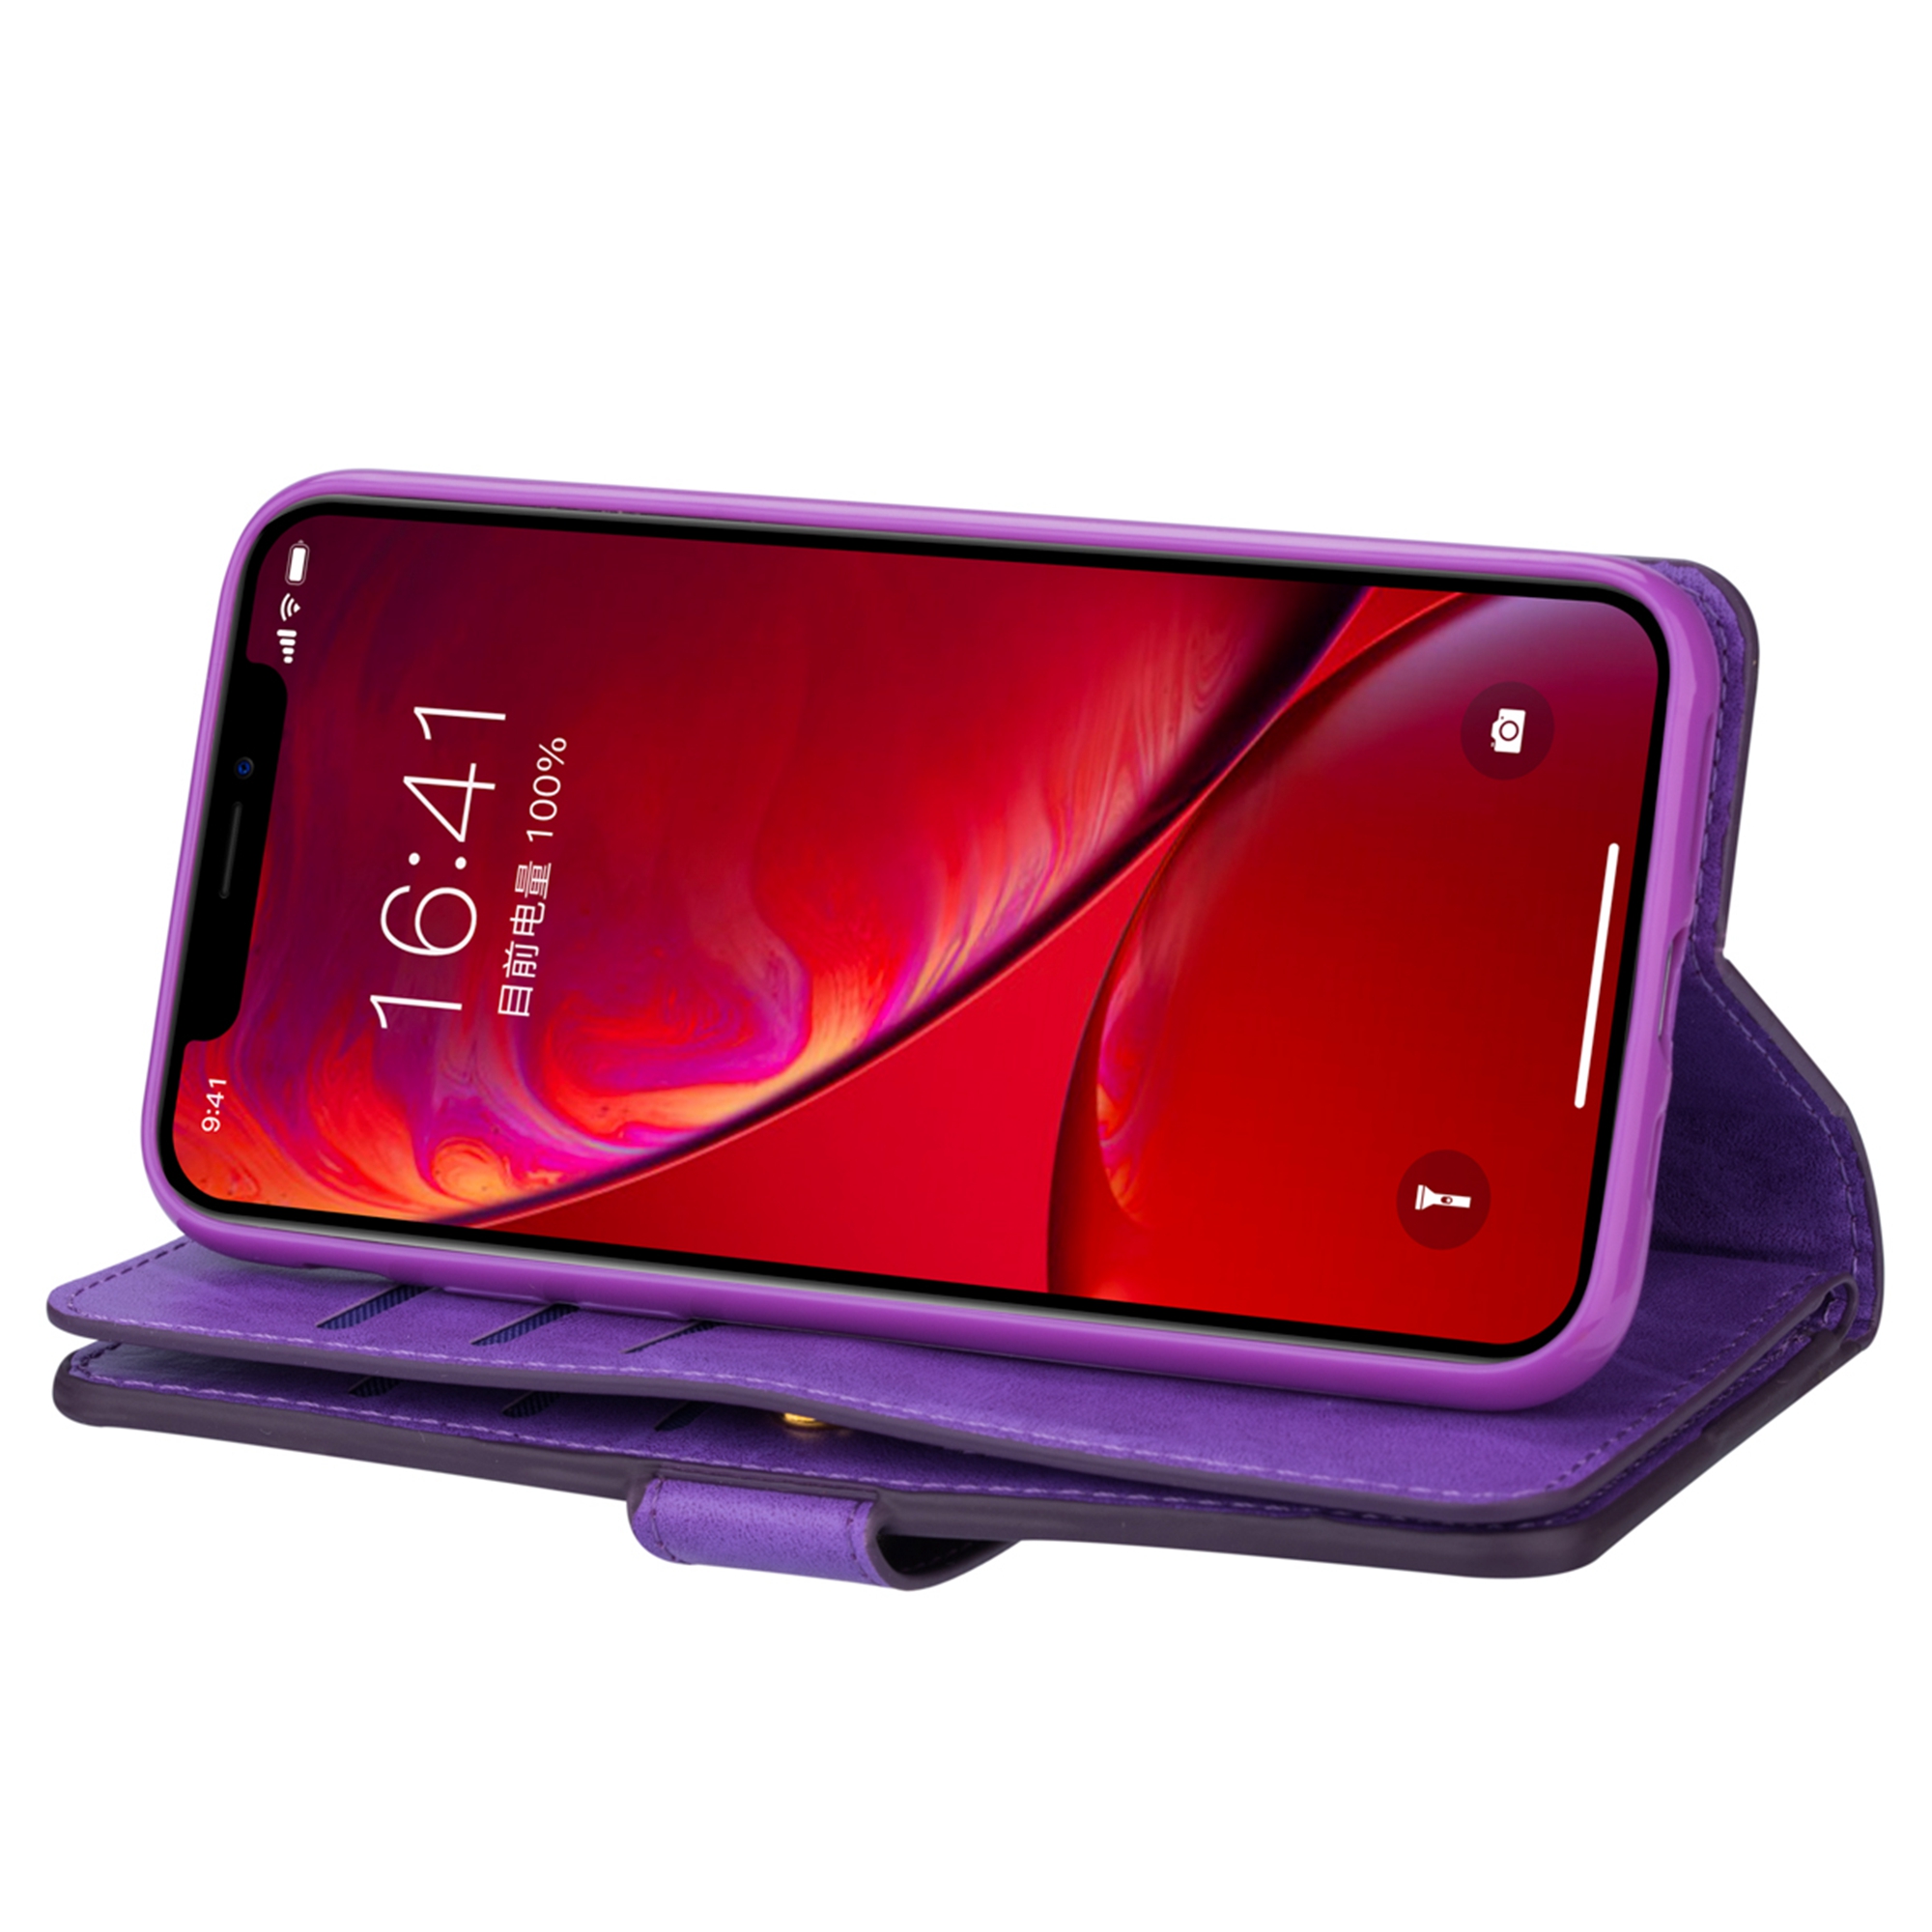 iPhone 11 Pro Max 6.5 inch Wallet Case, Dteck 9 Card Slots Premium Leather Zipper Purse case Flip Kickstand Folio Magnetic with Wrist Strap Credit Cash Cover For Apple iPhone 11 Pro Max, Purple - image 4 of 7